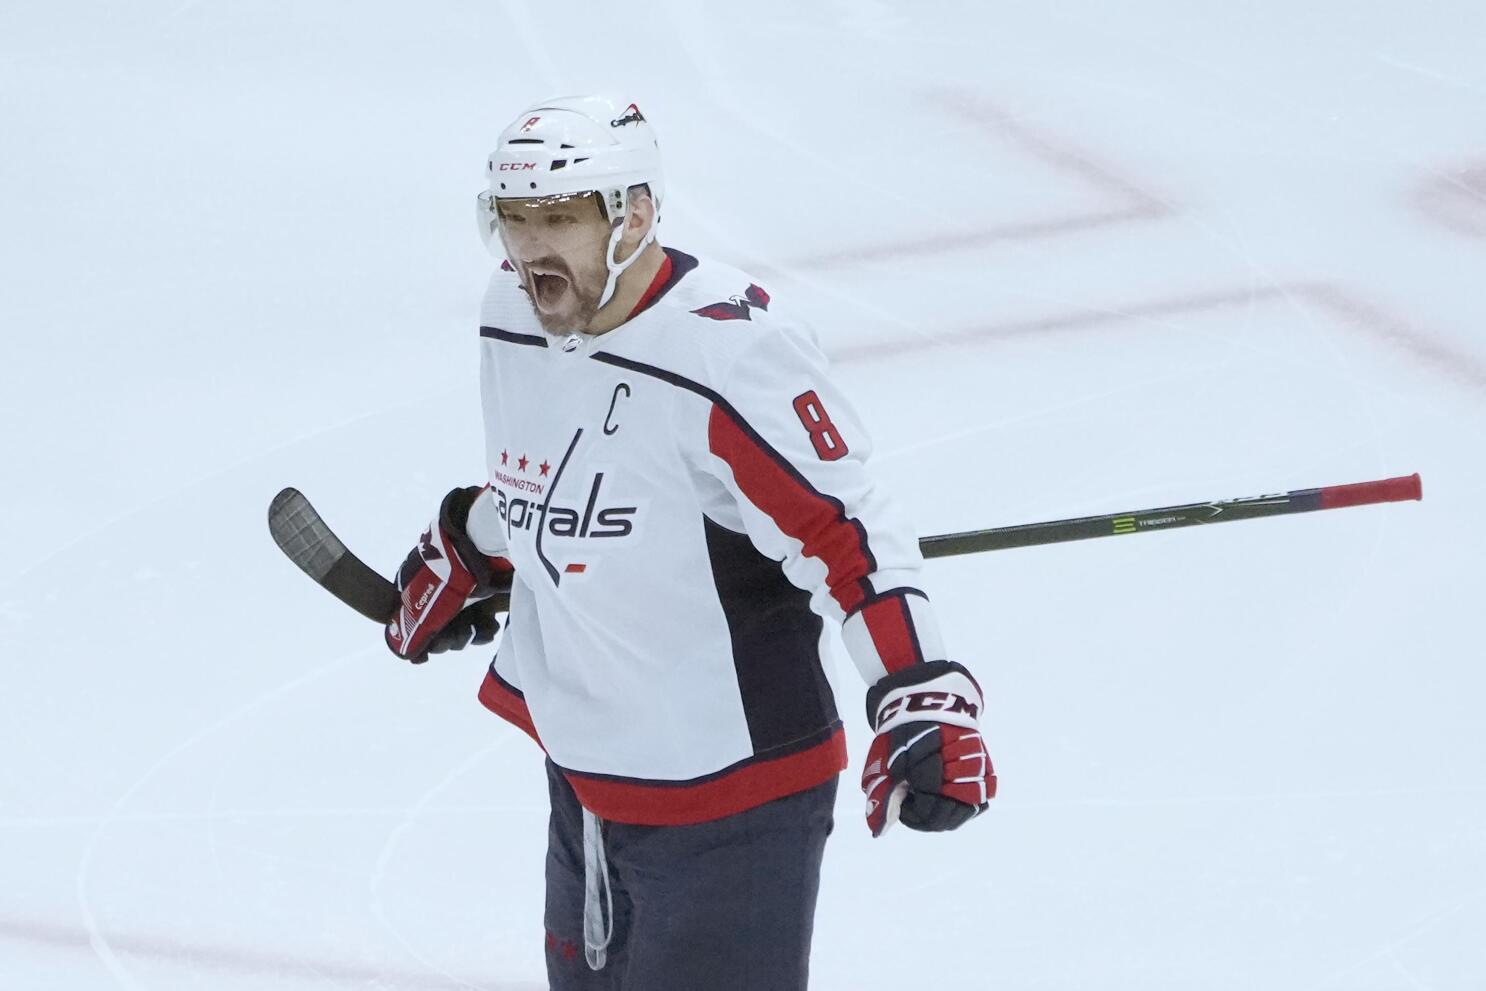 Alex Ovechkin's road to 800 goals